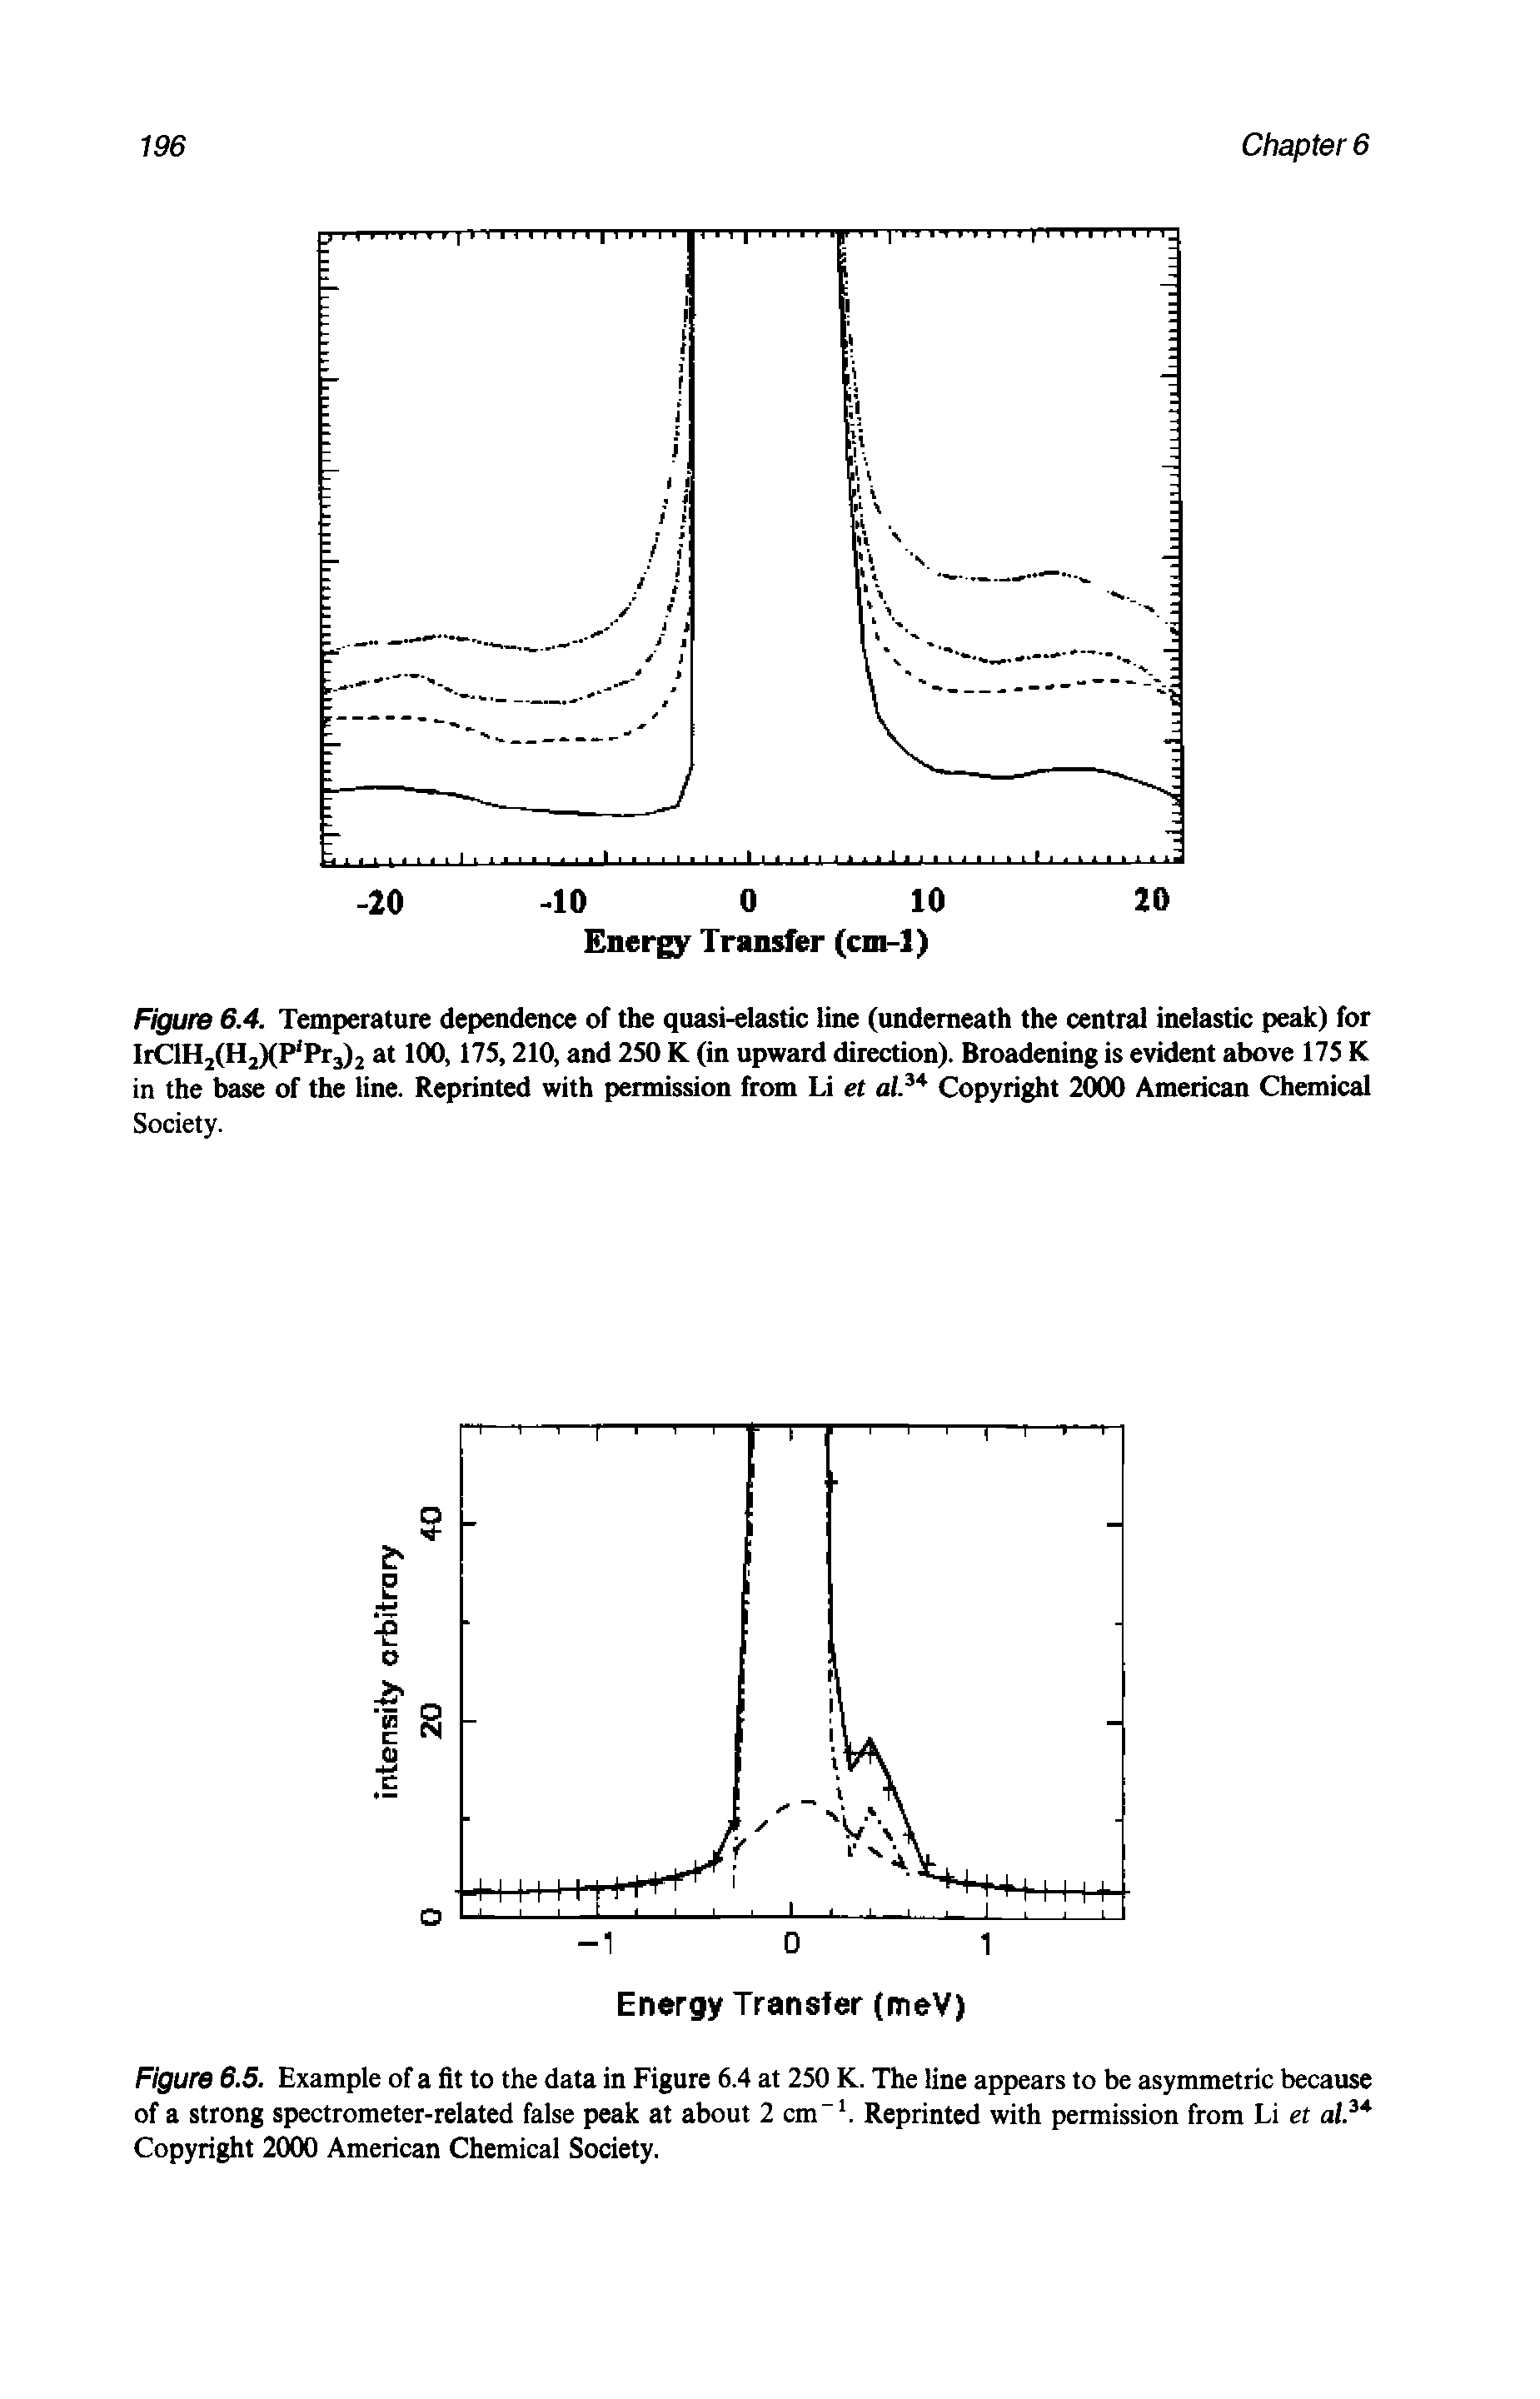 Figure 6.5. Example of a fit to the data in Figure 6.4 at 250 K. The line appears to be asymmetric because of a strong spectrometer-related false peak at about 2 cm-1. Reprinted with permission from Li et al Copyright 2000 American Chemical Society.